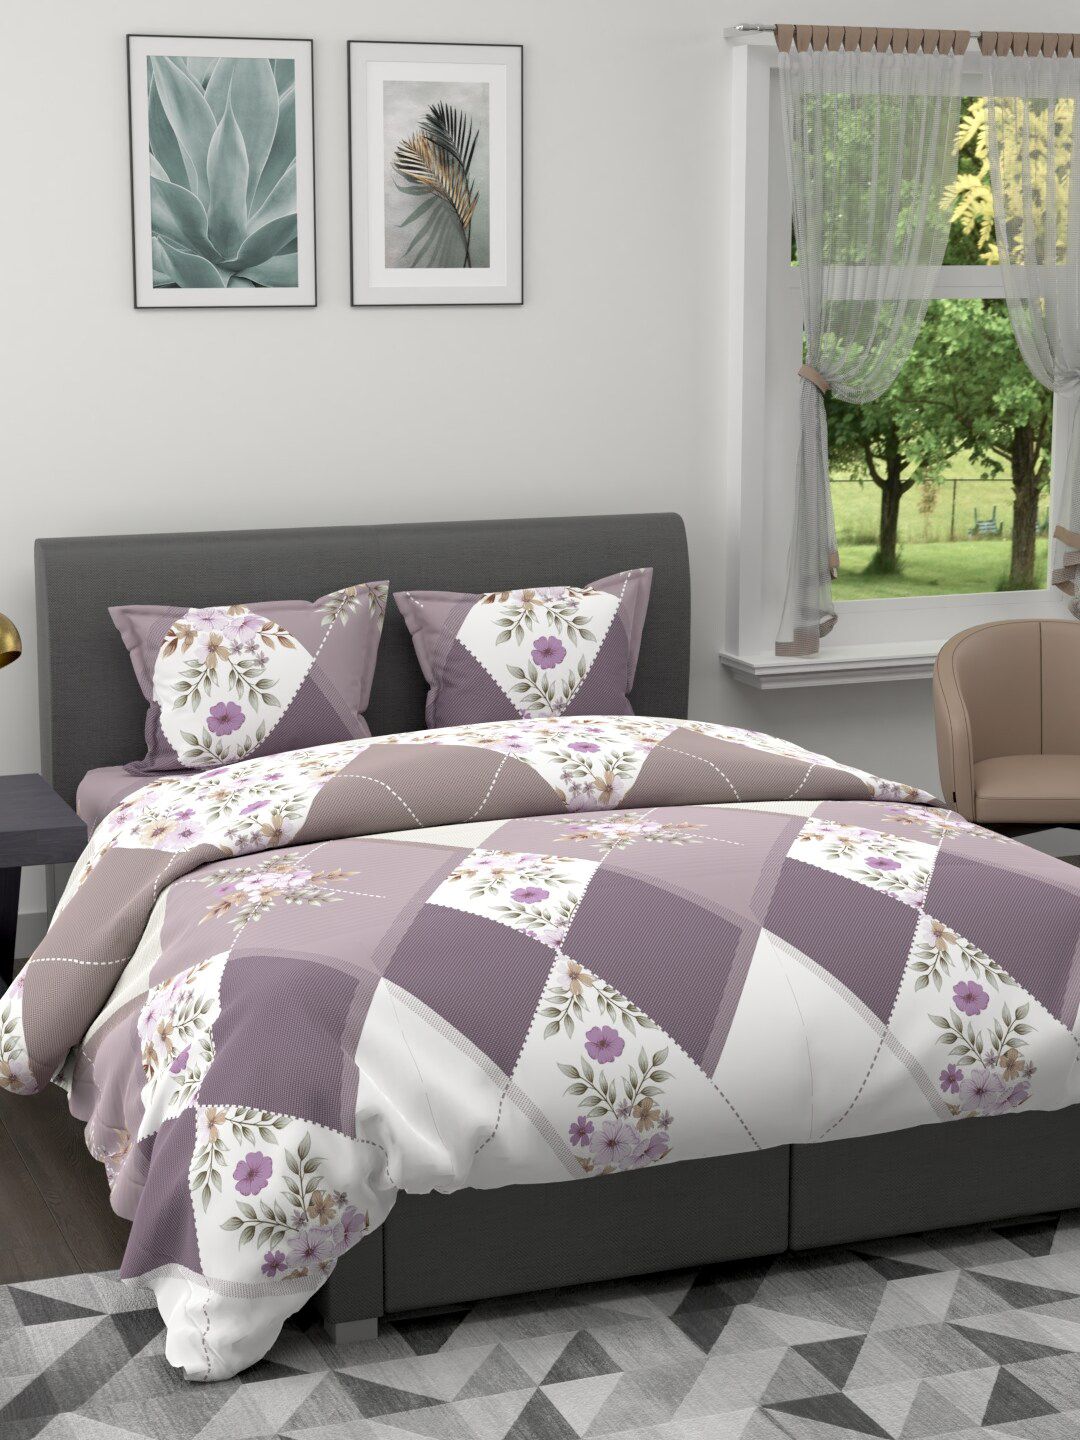 BIANCA Mauve & White Geometric Printed Cotton 150 GSM Double King Bedding Set Price in India